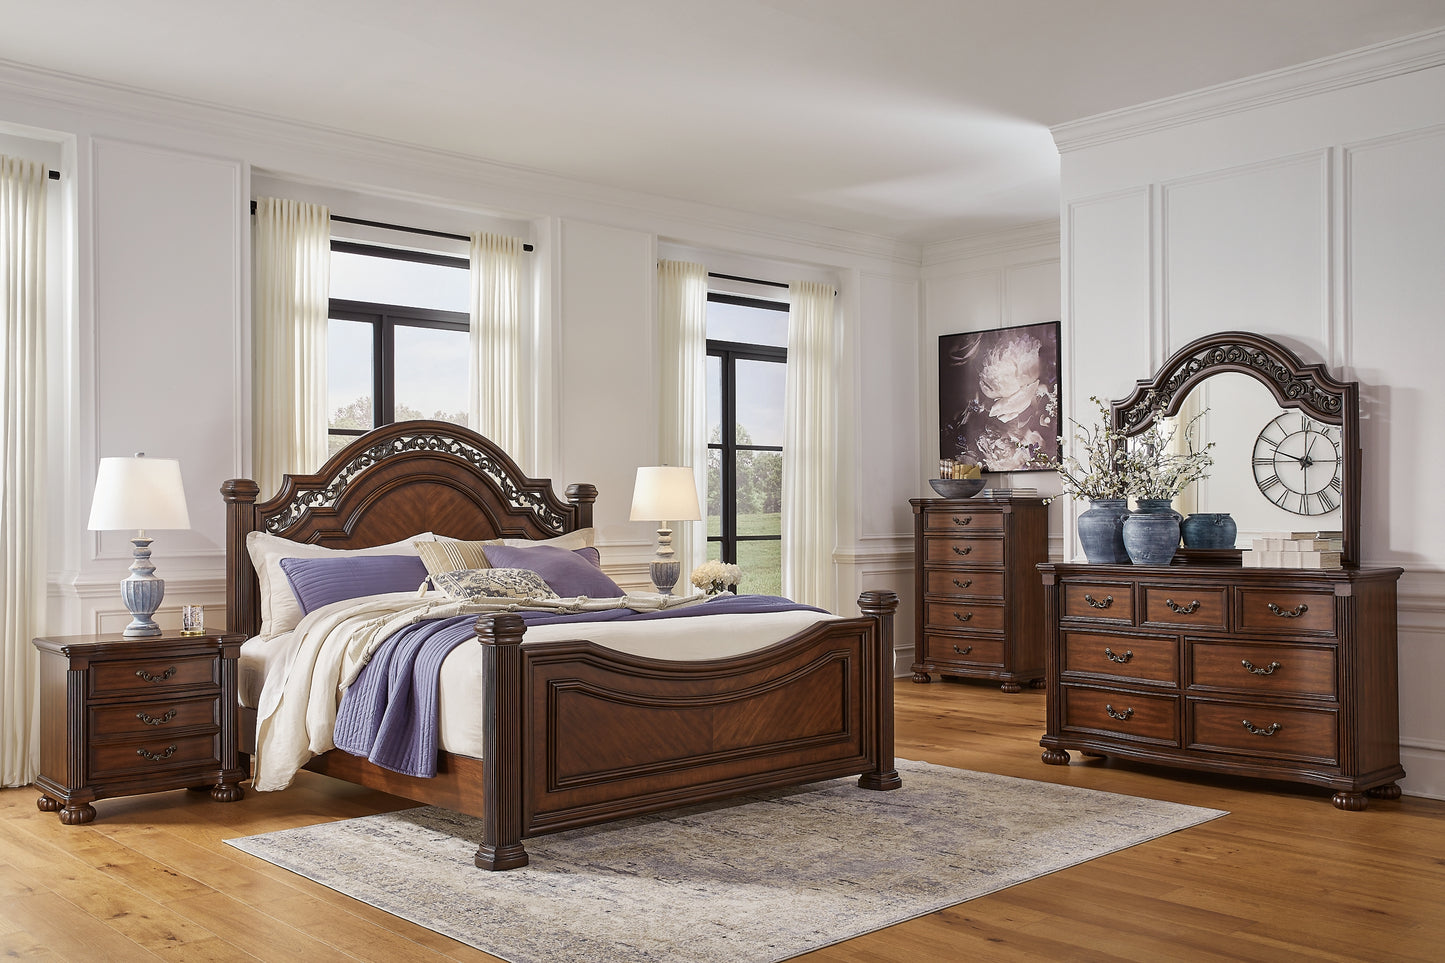 Lavinton Queen Poster Bed with Dresser and Nightstand